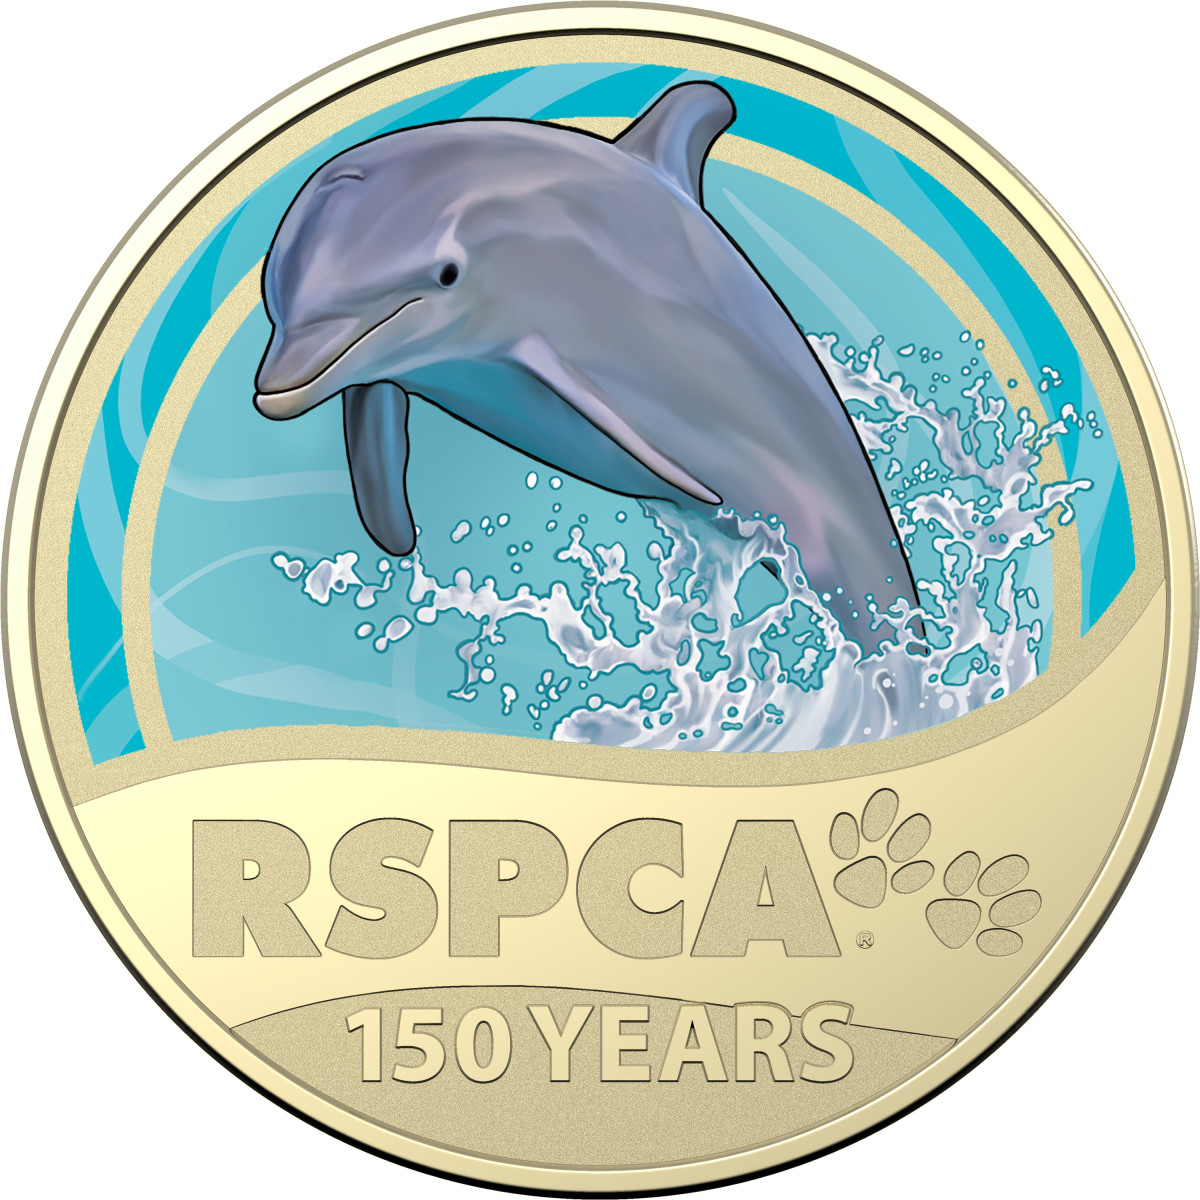 The dolphin coin sports a beautiful design with the dolphin breaching the surface to say hello, with the water coming up around the tail, a show of the dolphin's beauty and grace.